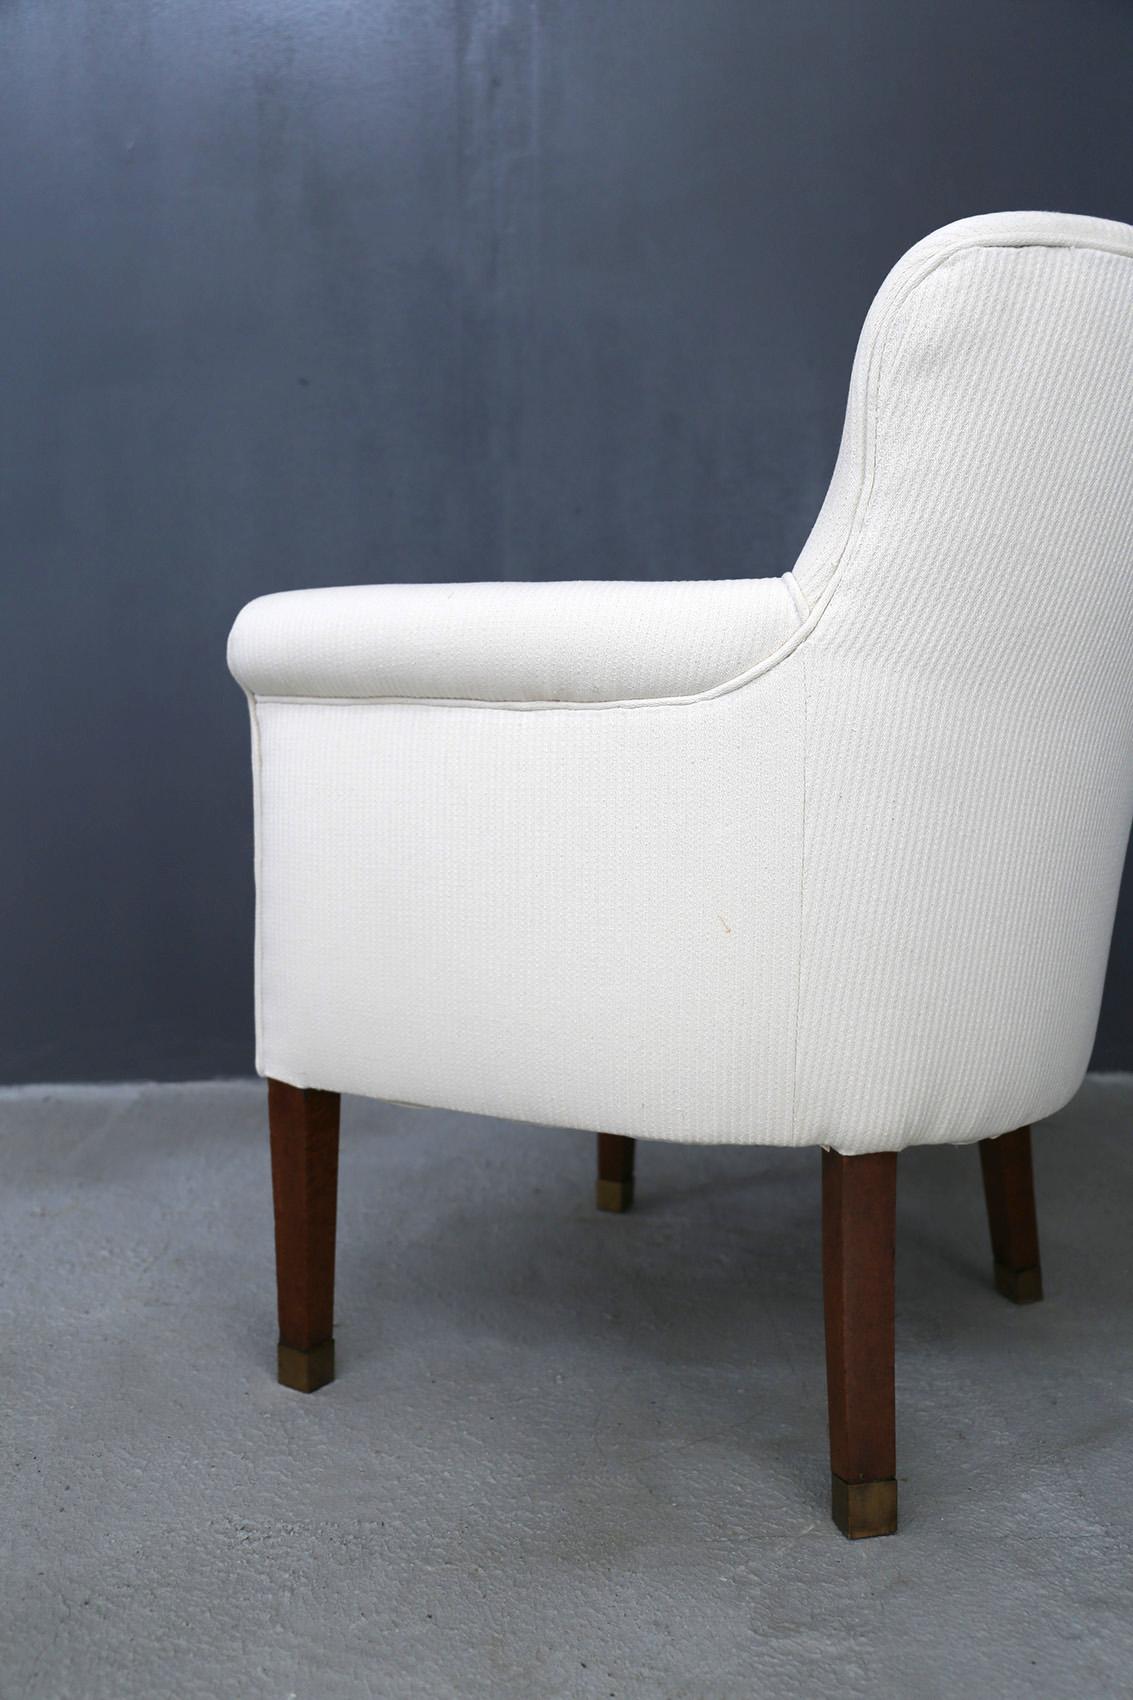 Pair of attributed to Paul Follot armchairs from 1930, French Art Deco. The set consists of two armchairs restored in a beautiful white Italian cotton. Their structure is made of briarwood. The armchairs come from a private house in Nice (FR). In